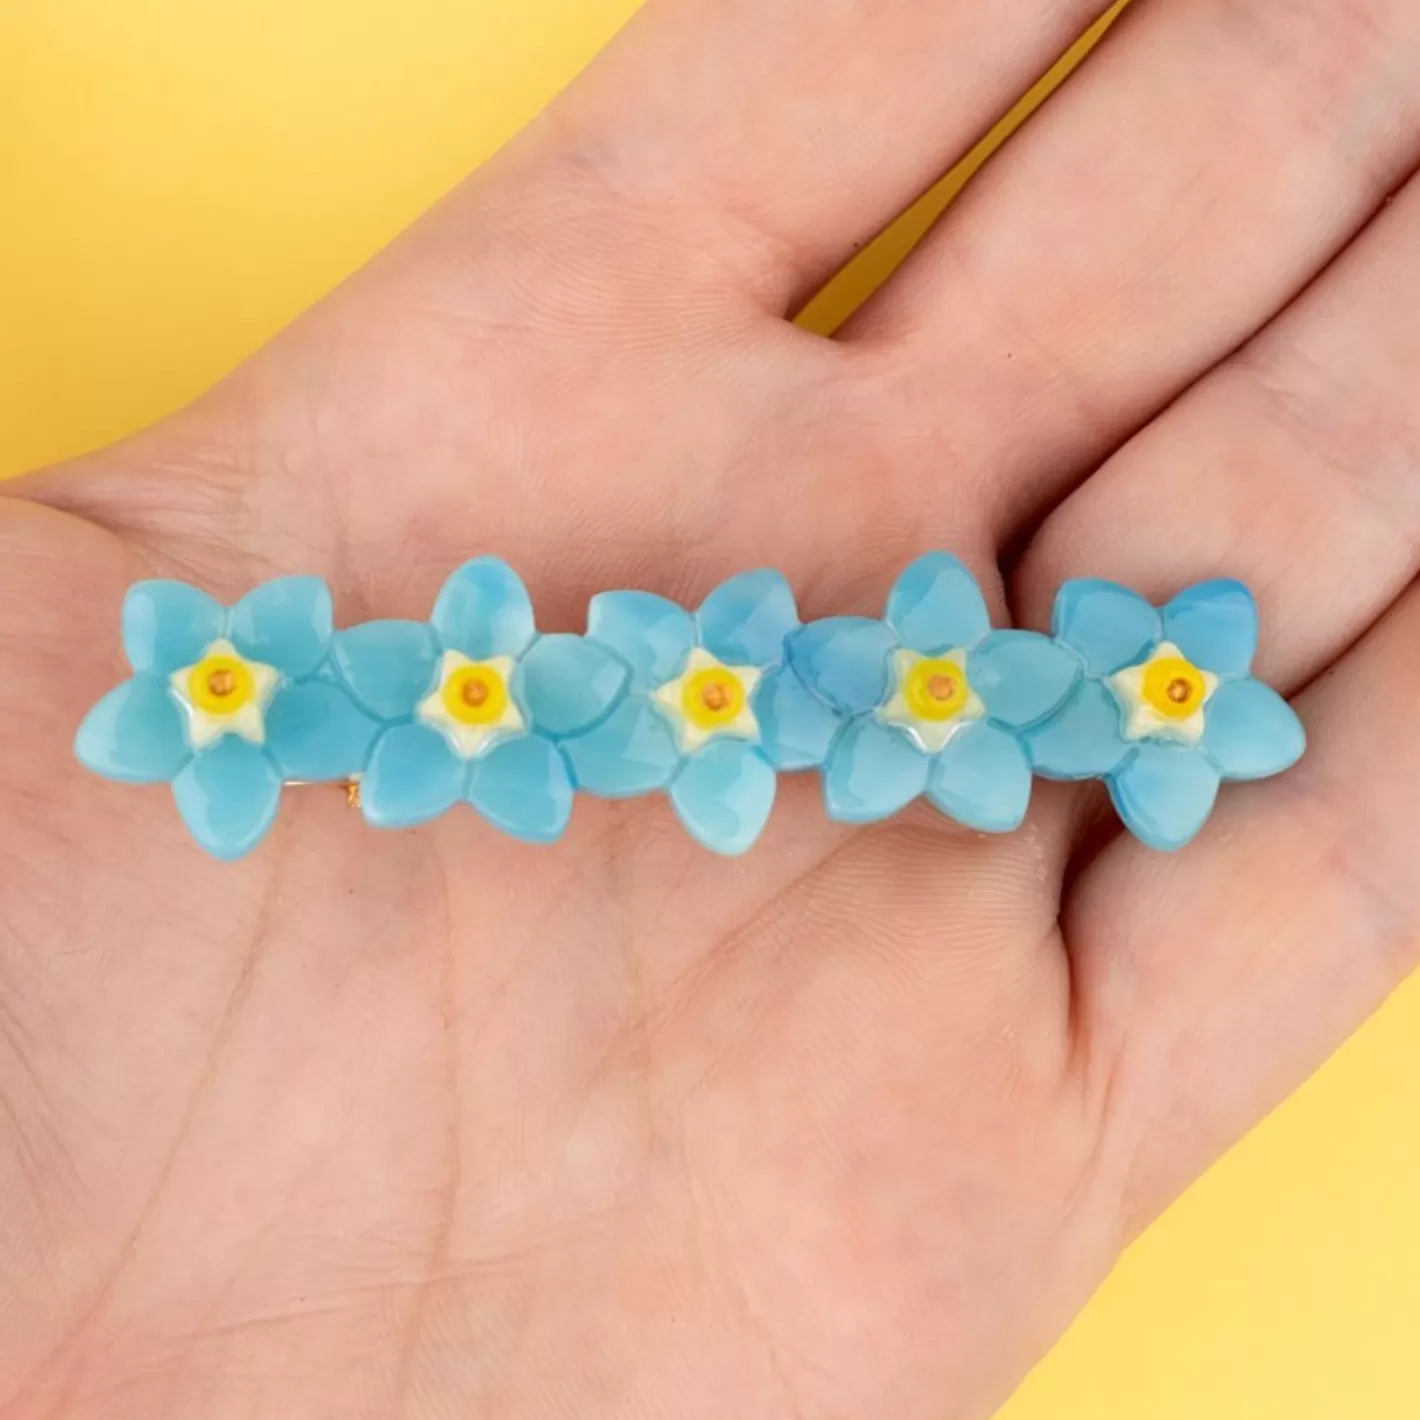 Forget Me Not Hair Clip>Coucou Suzette Discount